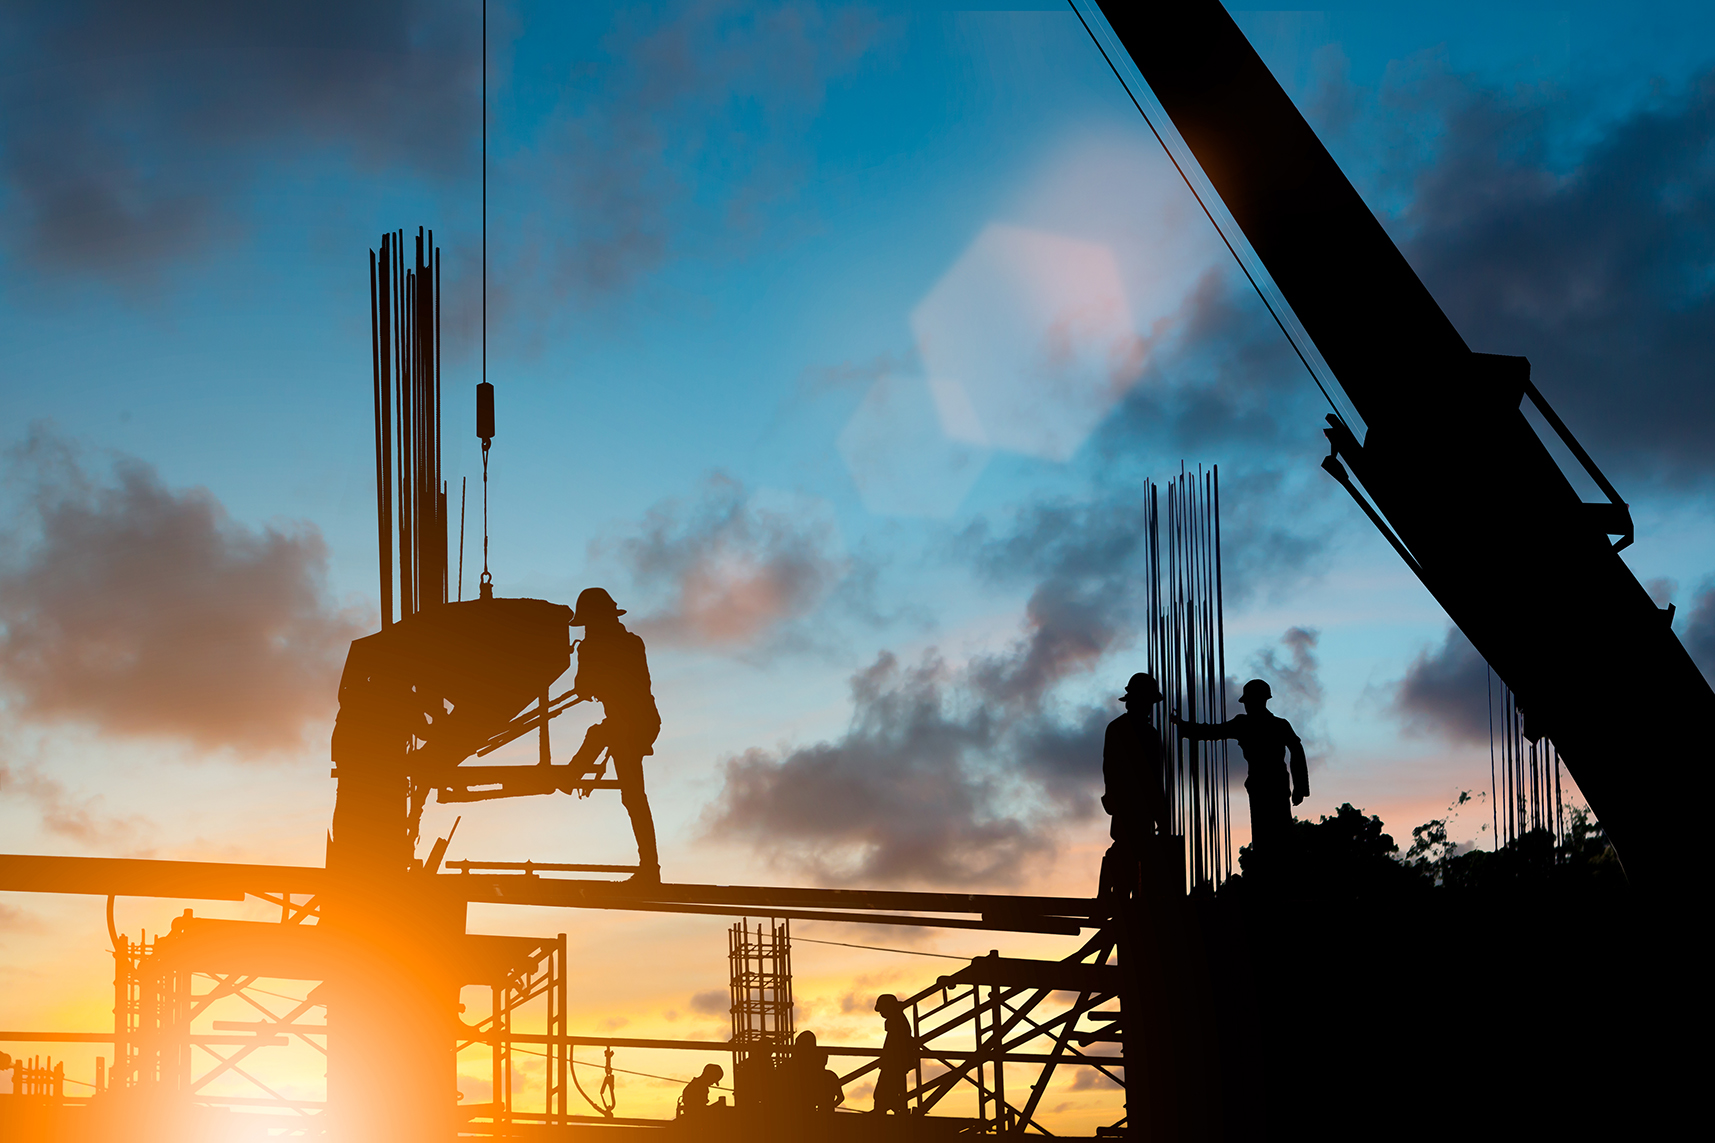 Silhouette of construction workers at site, with sun setting